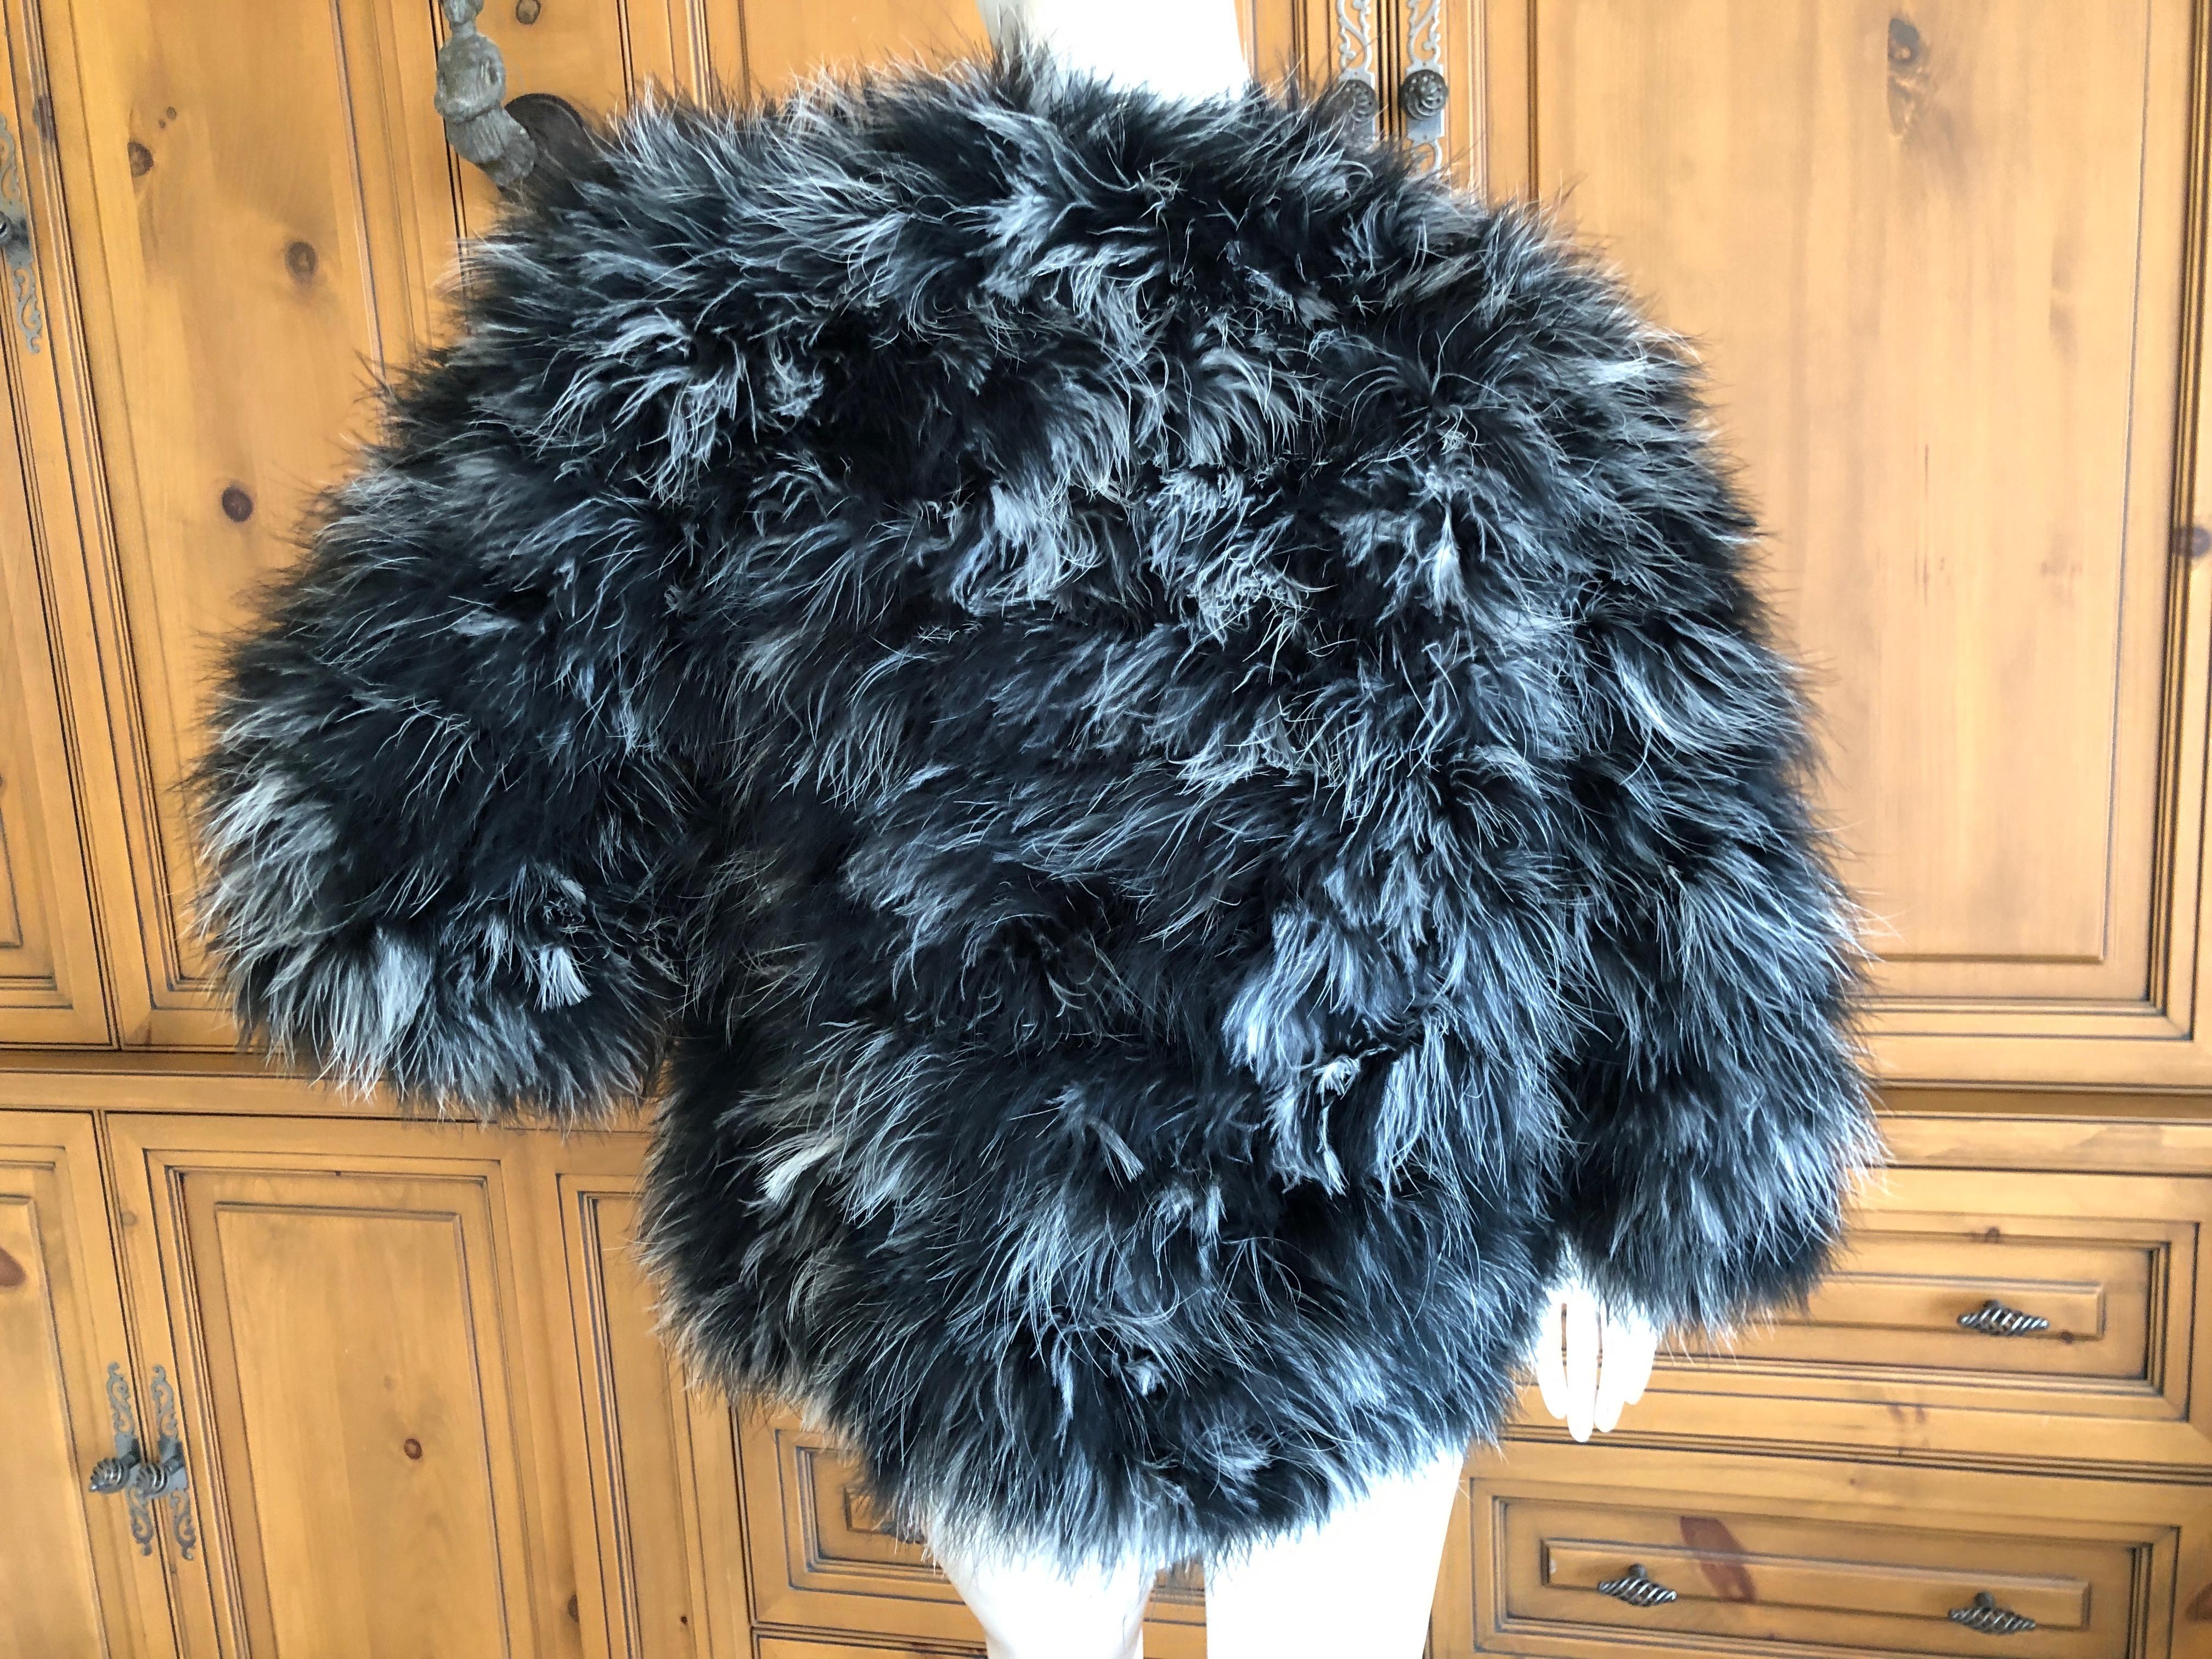 Yves Saint Laurent Rive Gauche 1970's Maribou Ostrich Feather Chubby Jacket For Sale 2